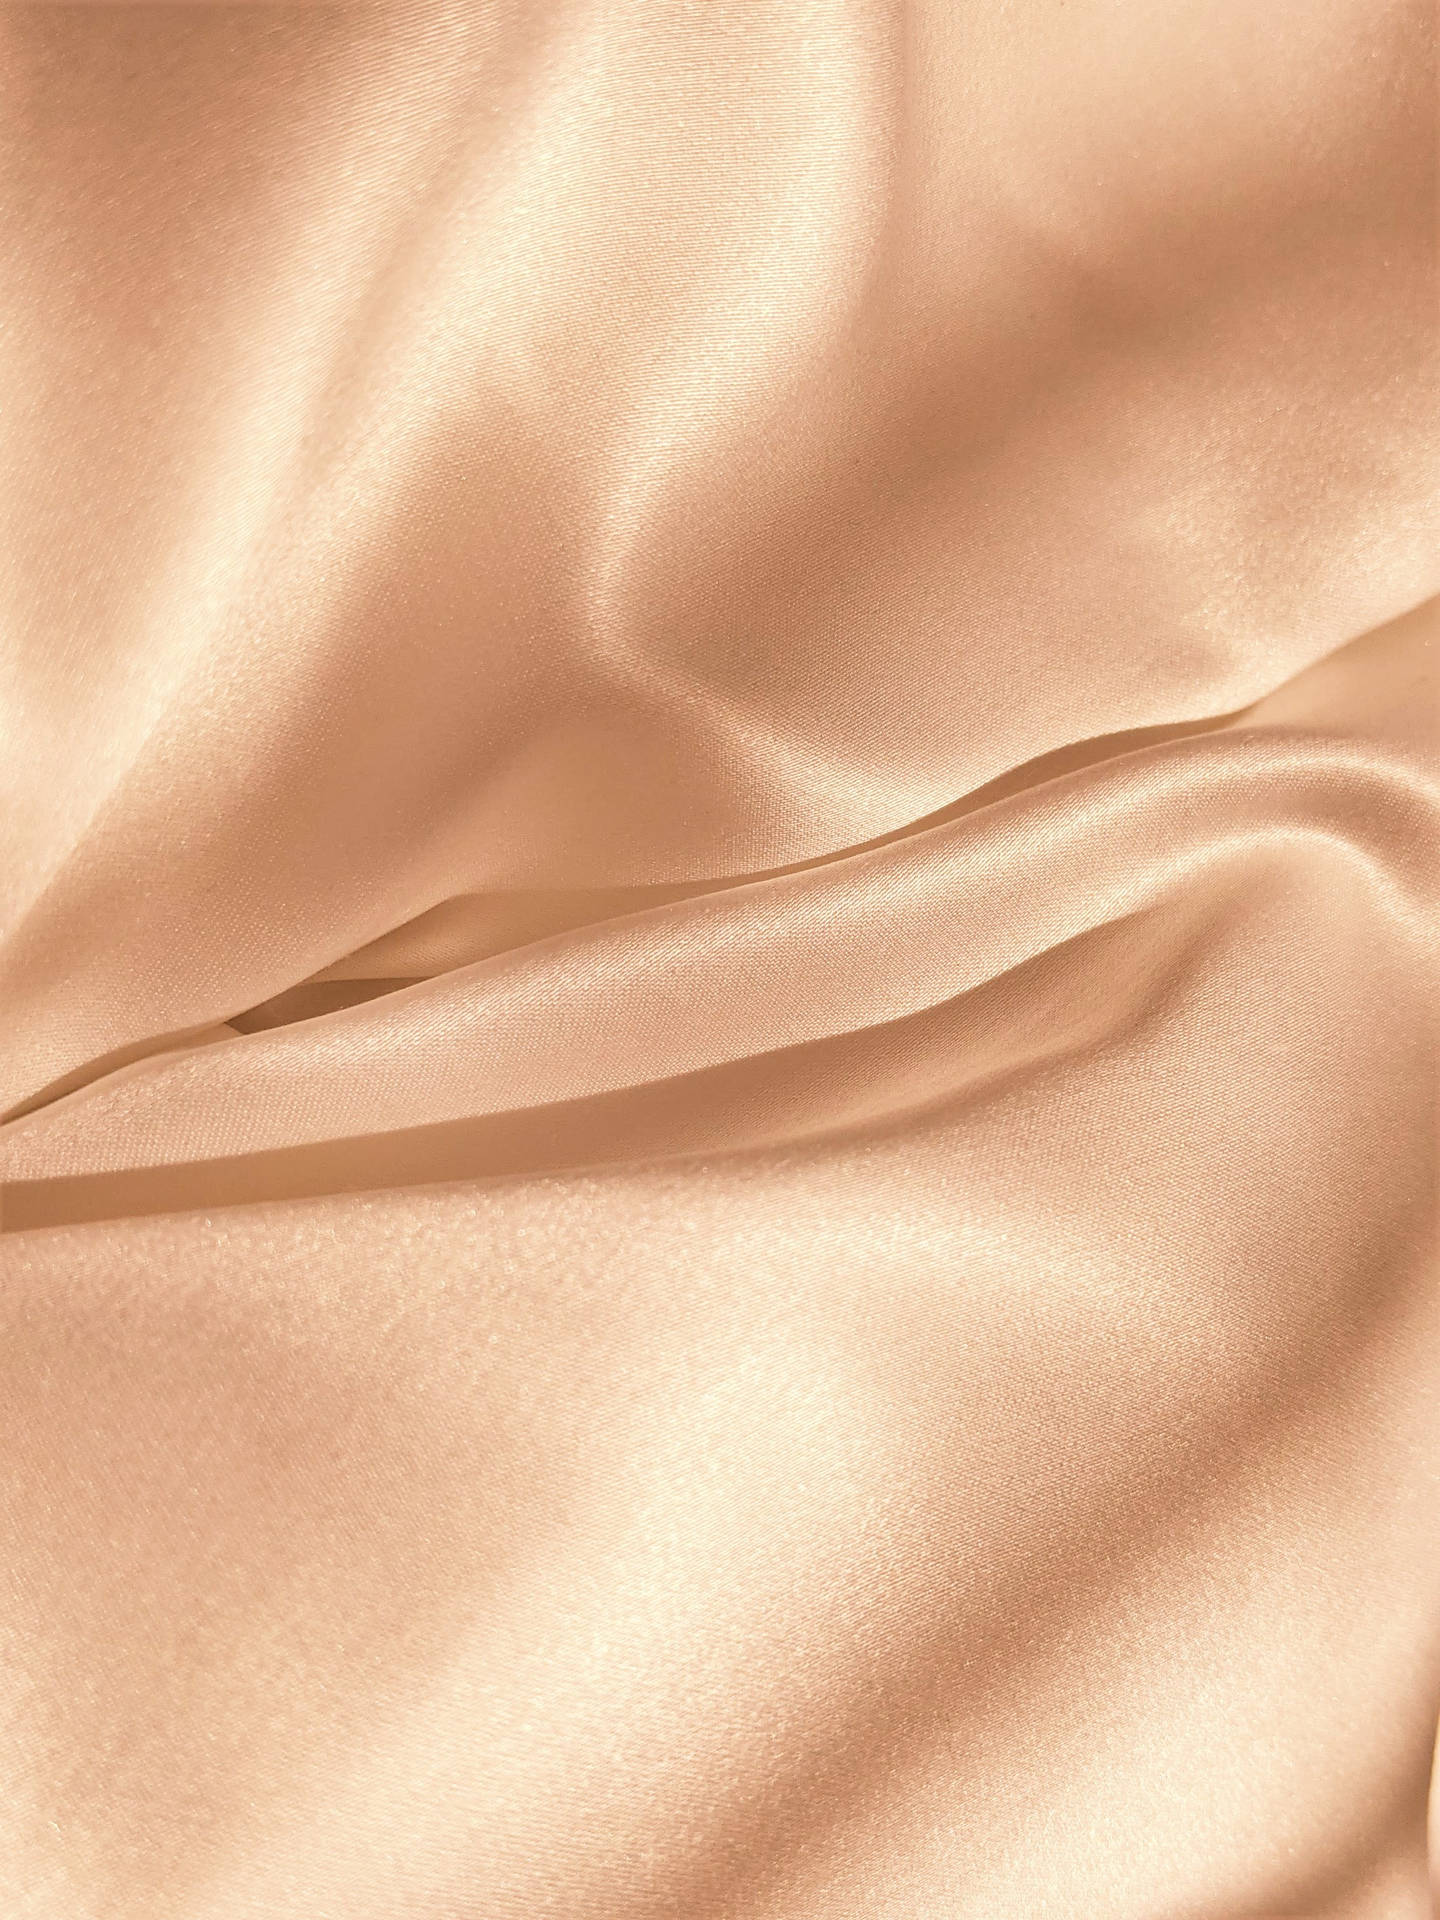 Beige 2172X2896 Wallpaper and Background Image